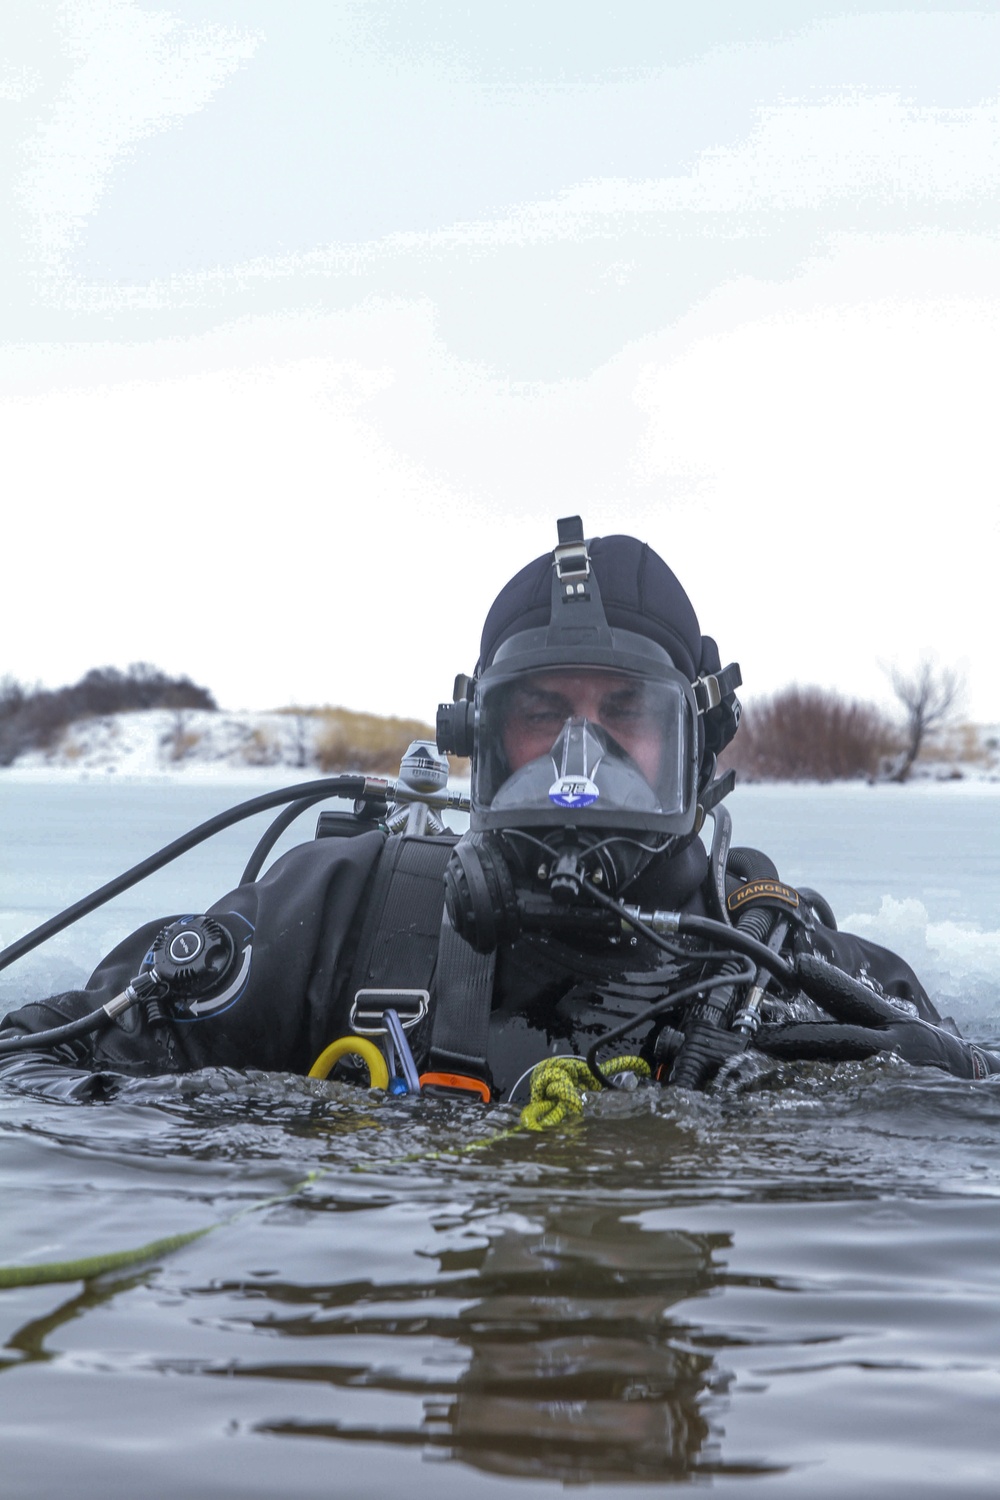 10th SFG(A) Divers Conduct Ice Dive Training